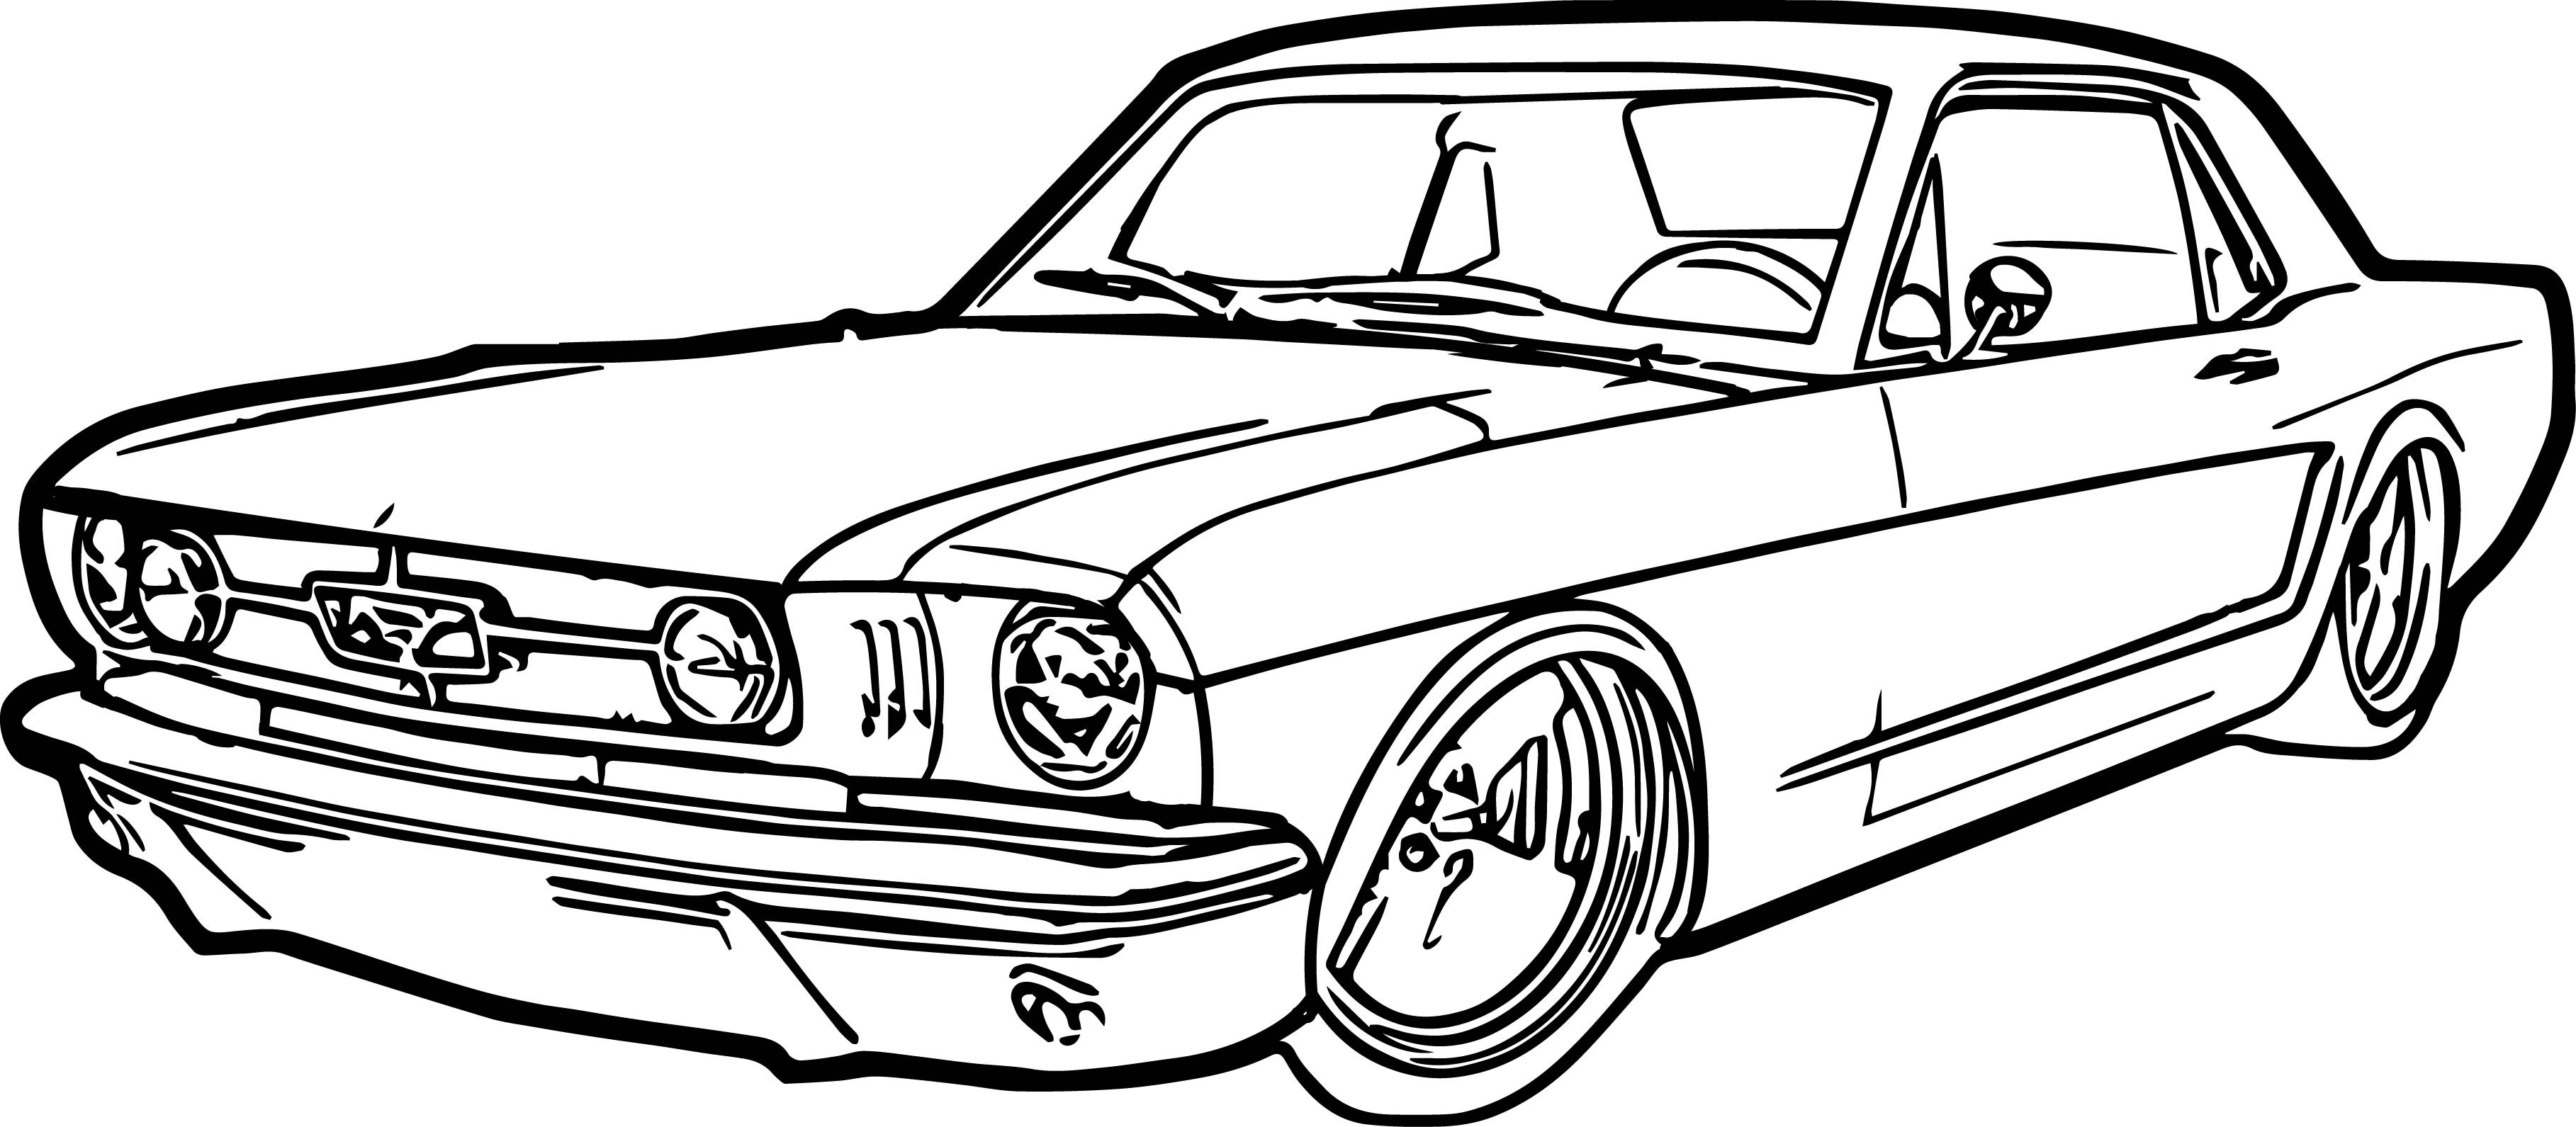 race car coloring pages free printable